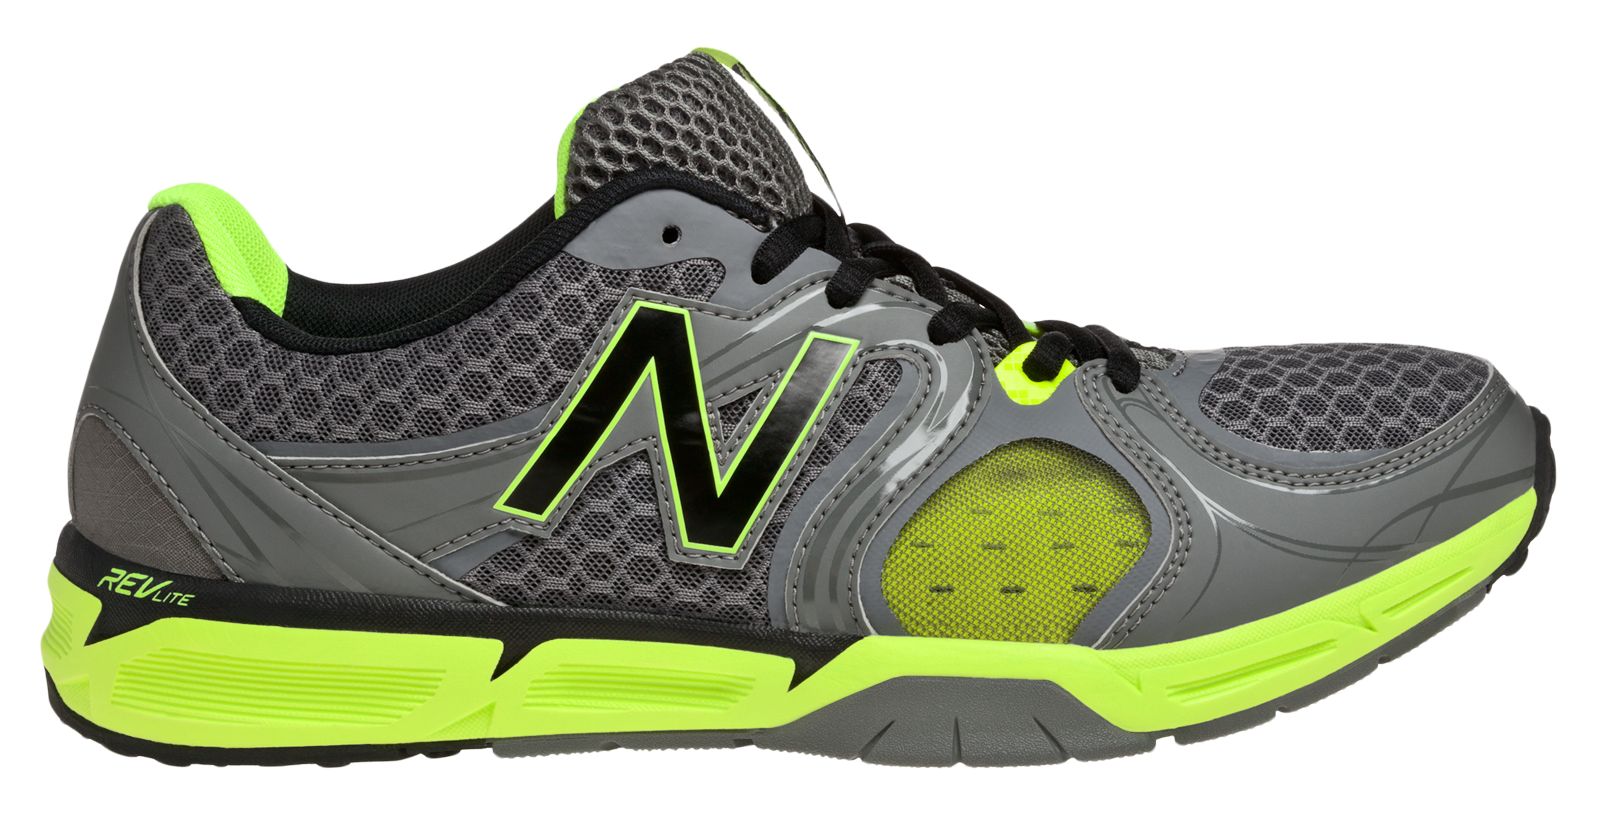 Off on MX797GY2 at Joe's New Balance Outlet